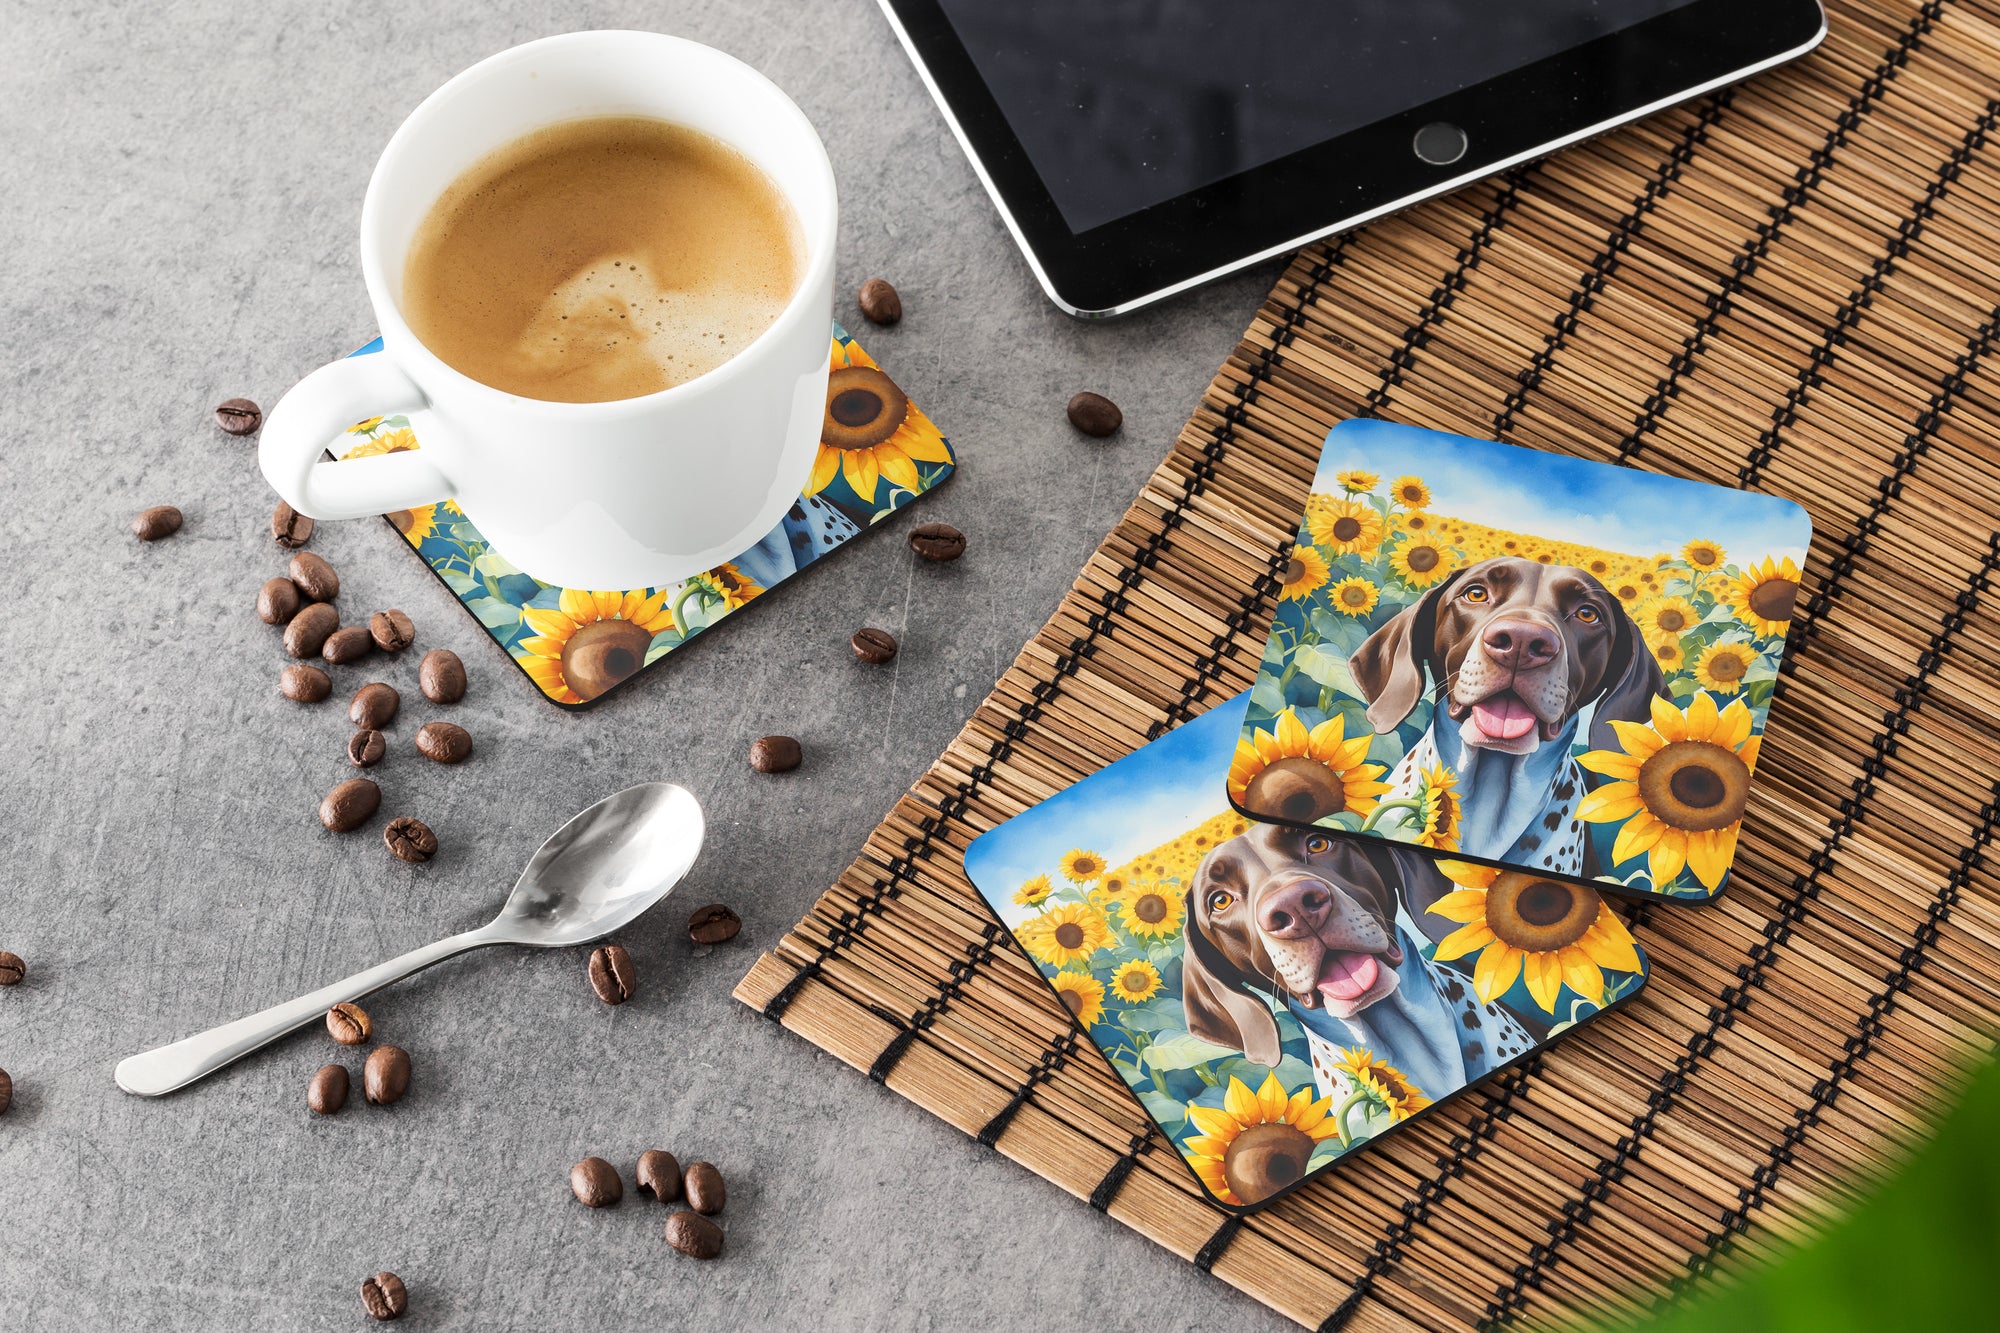 German Shorthaired Pointer in Sunflowers Foam Coasters